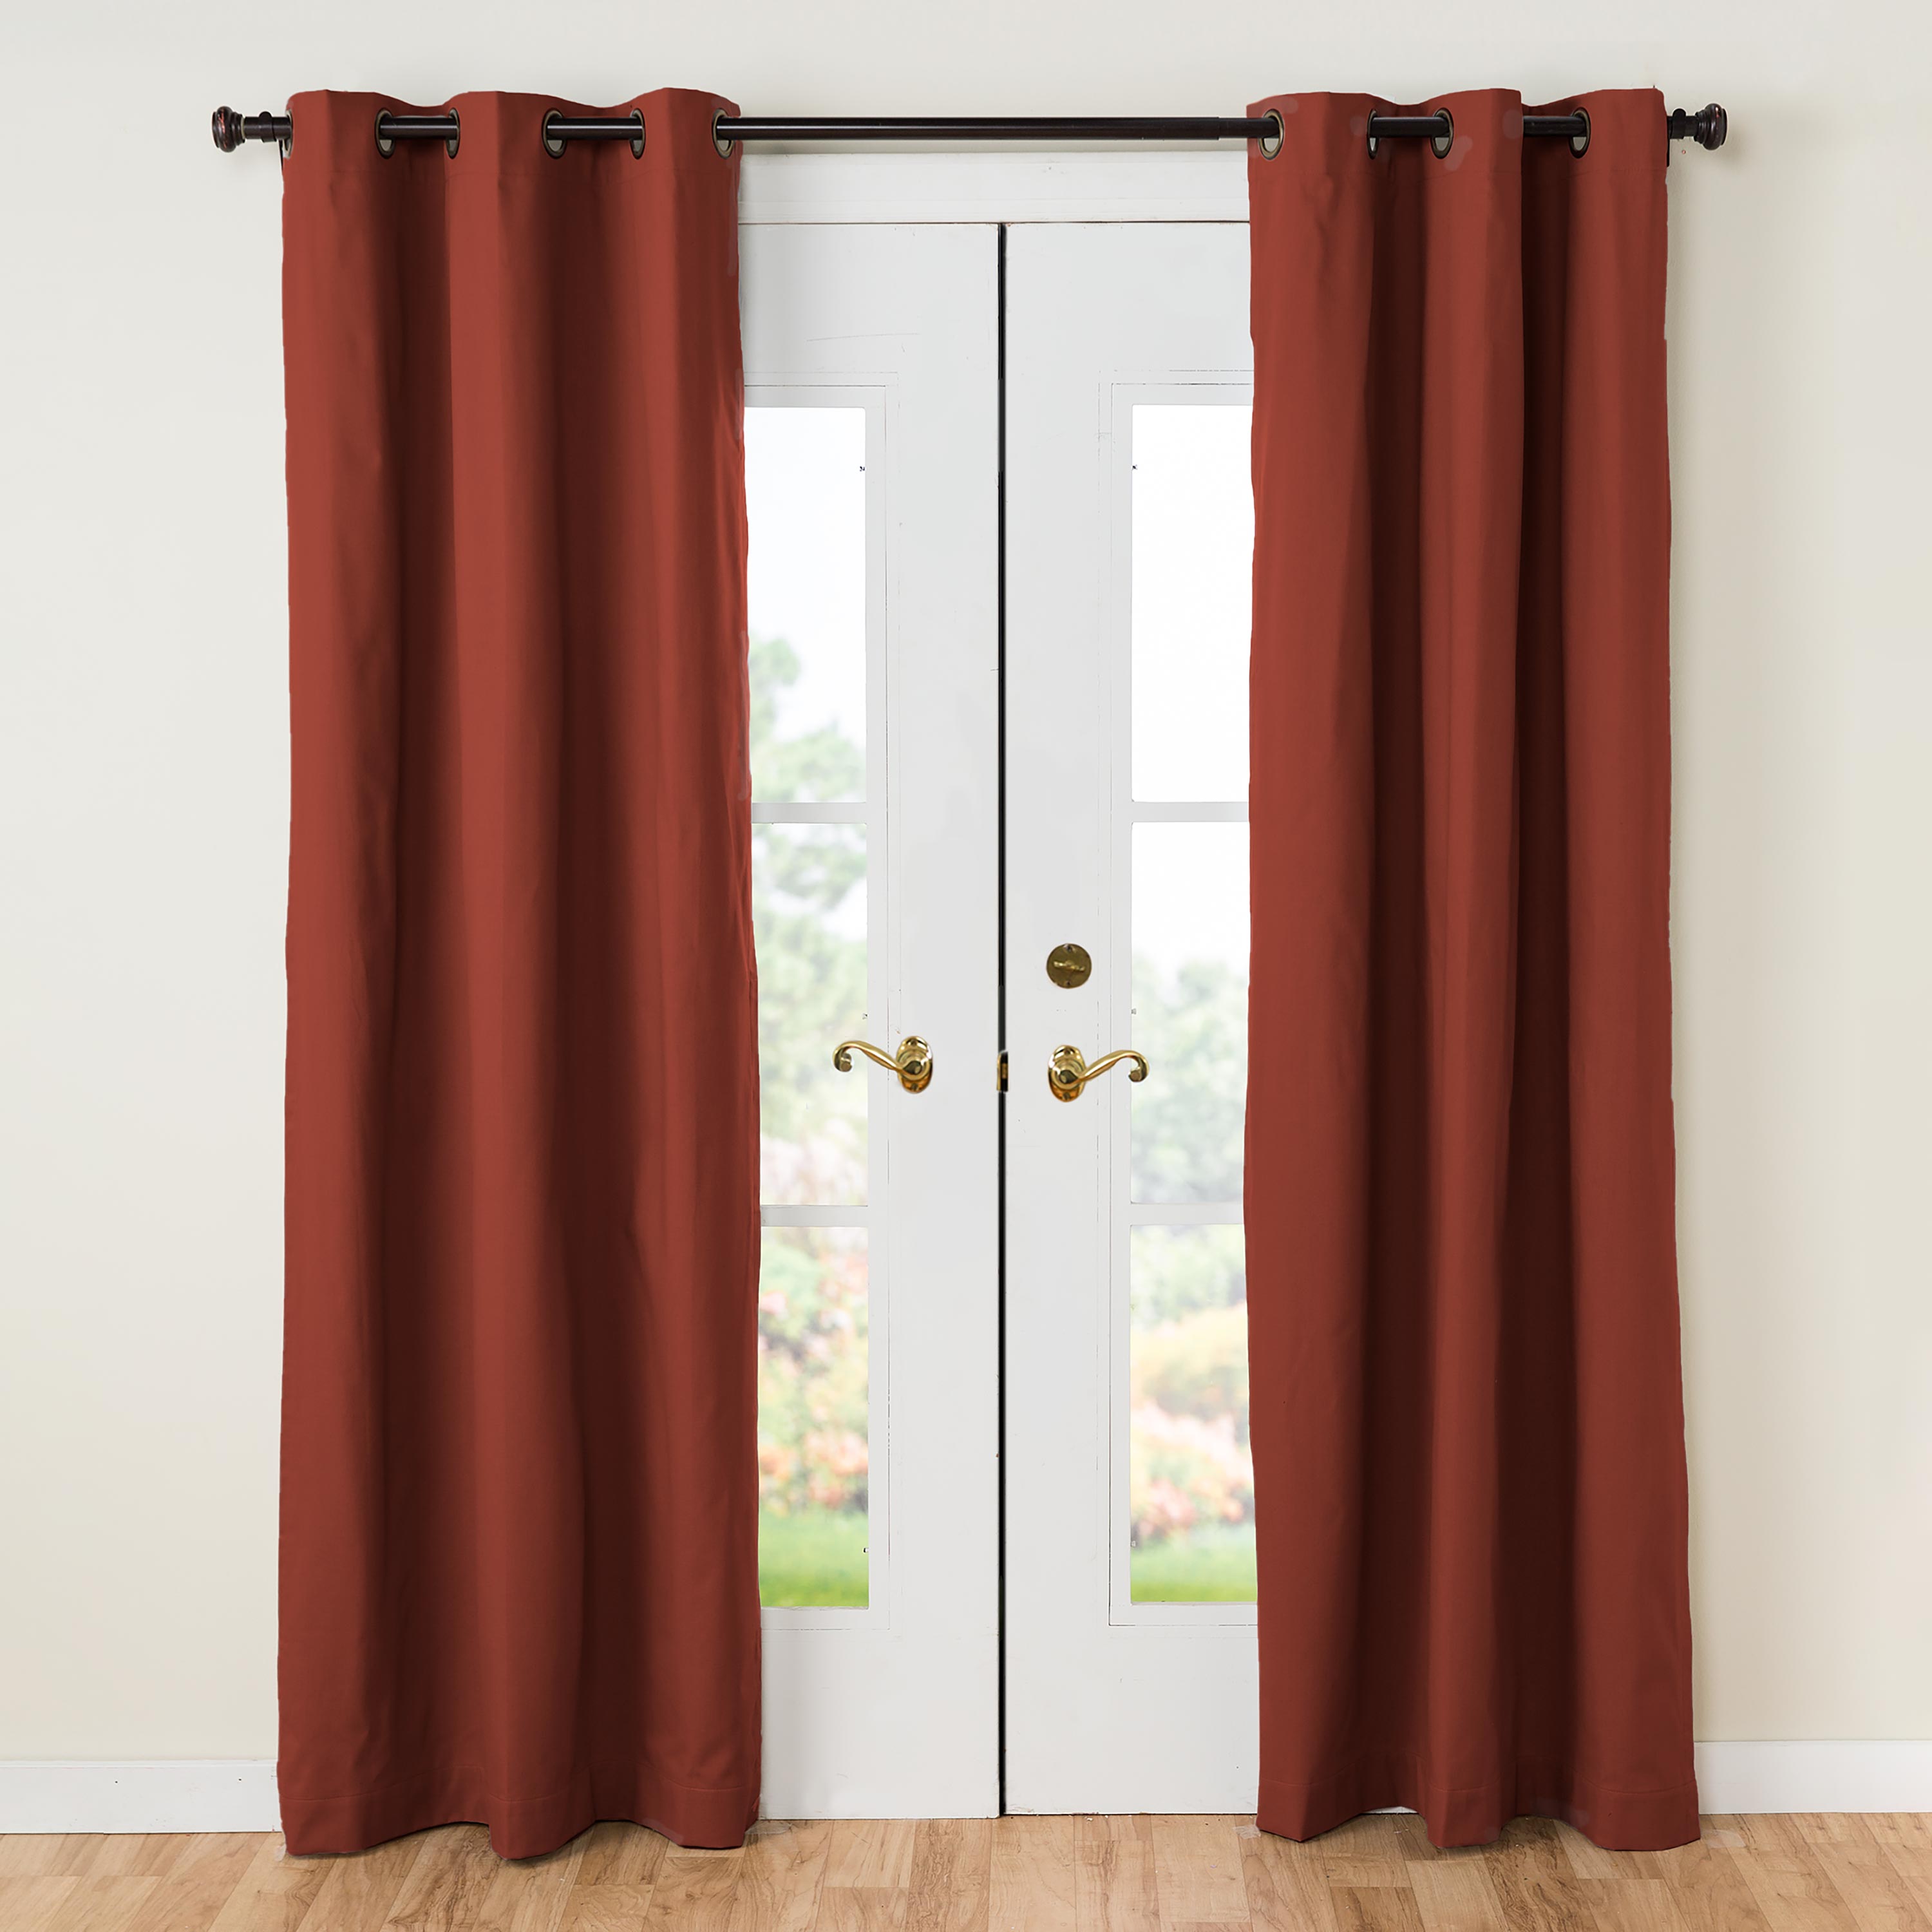 84"L Thermalogic Energy Efficient Insulated Solid Grommet-Top Curtain Pair